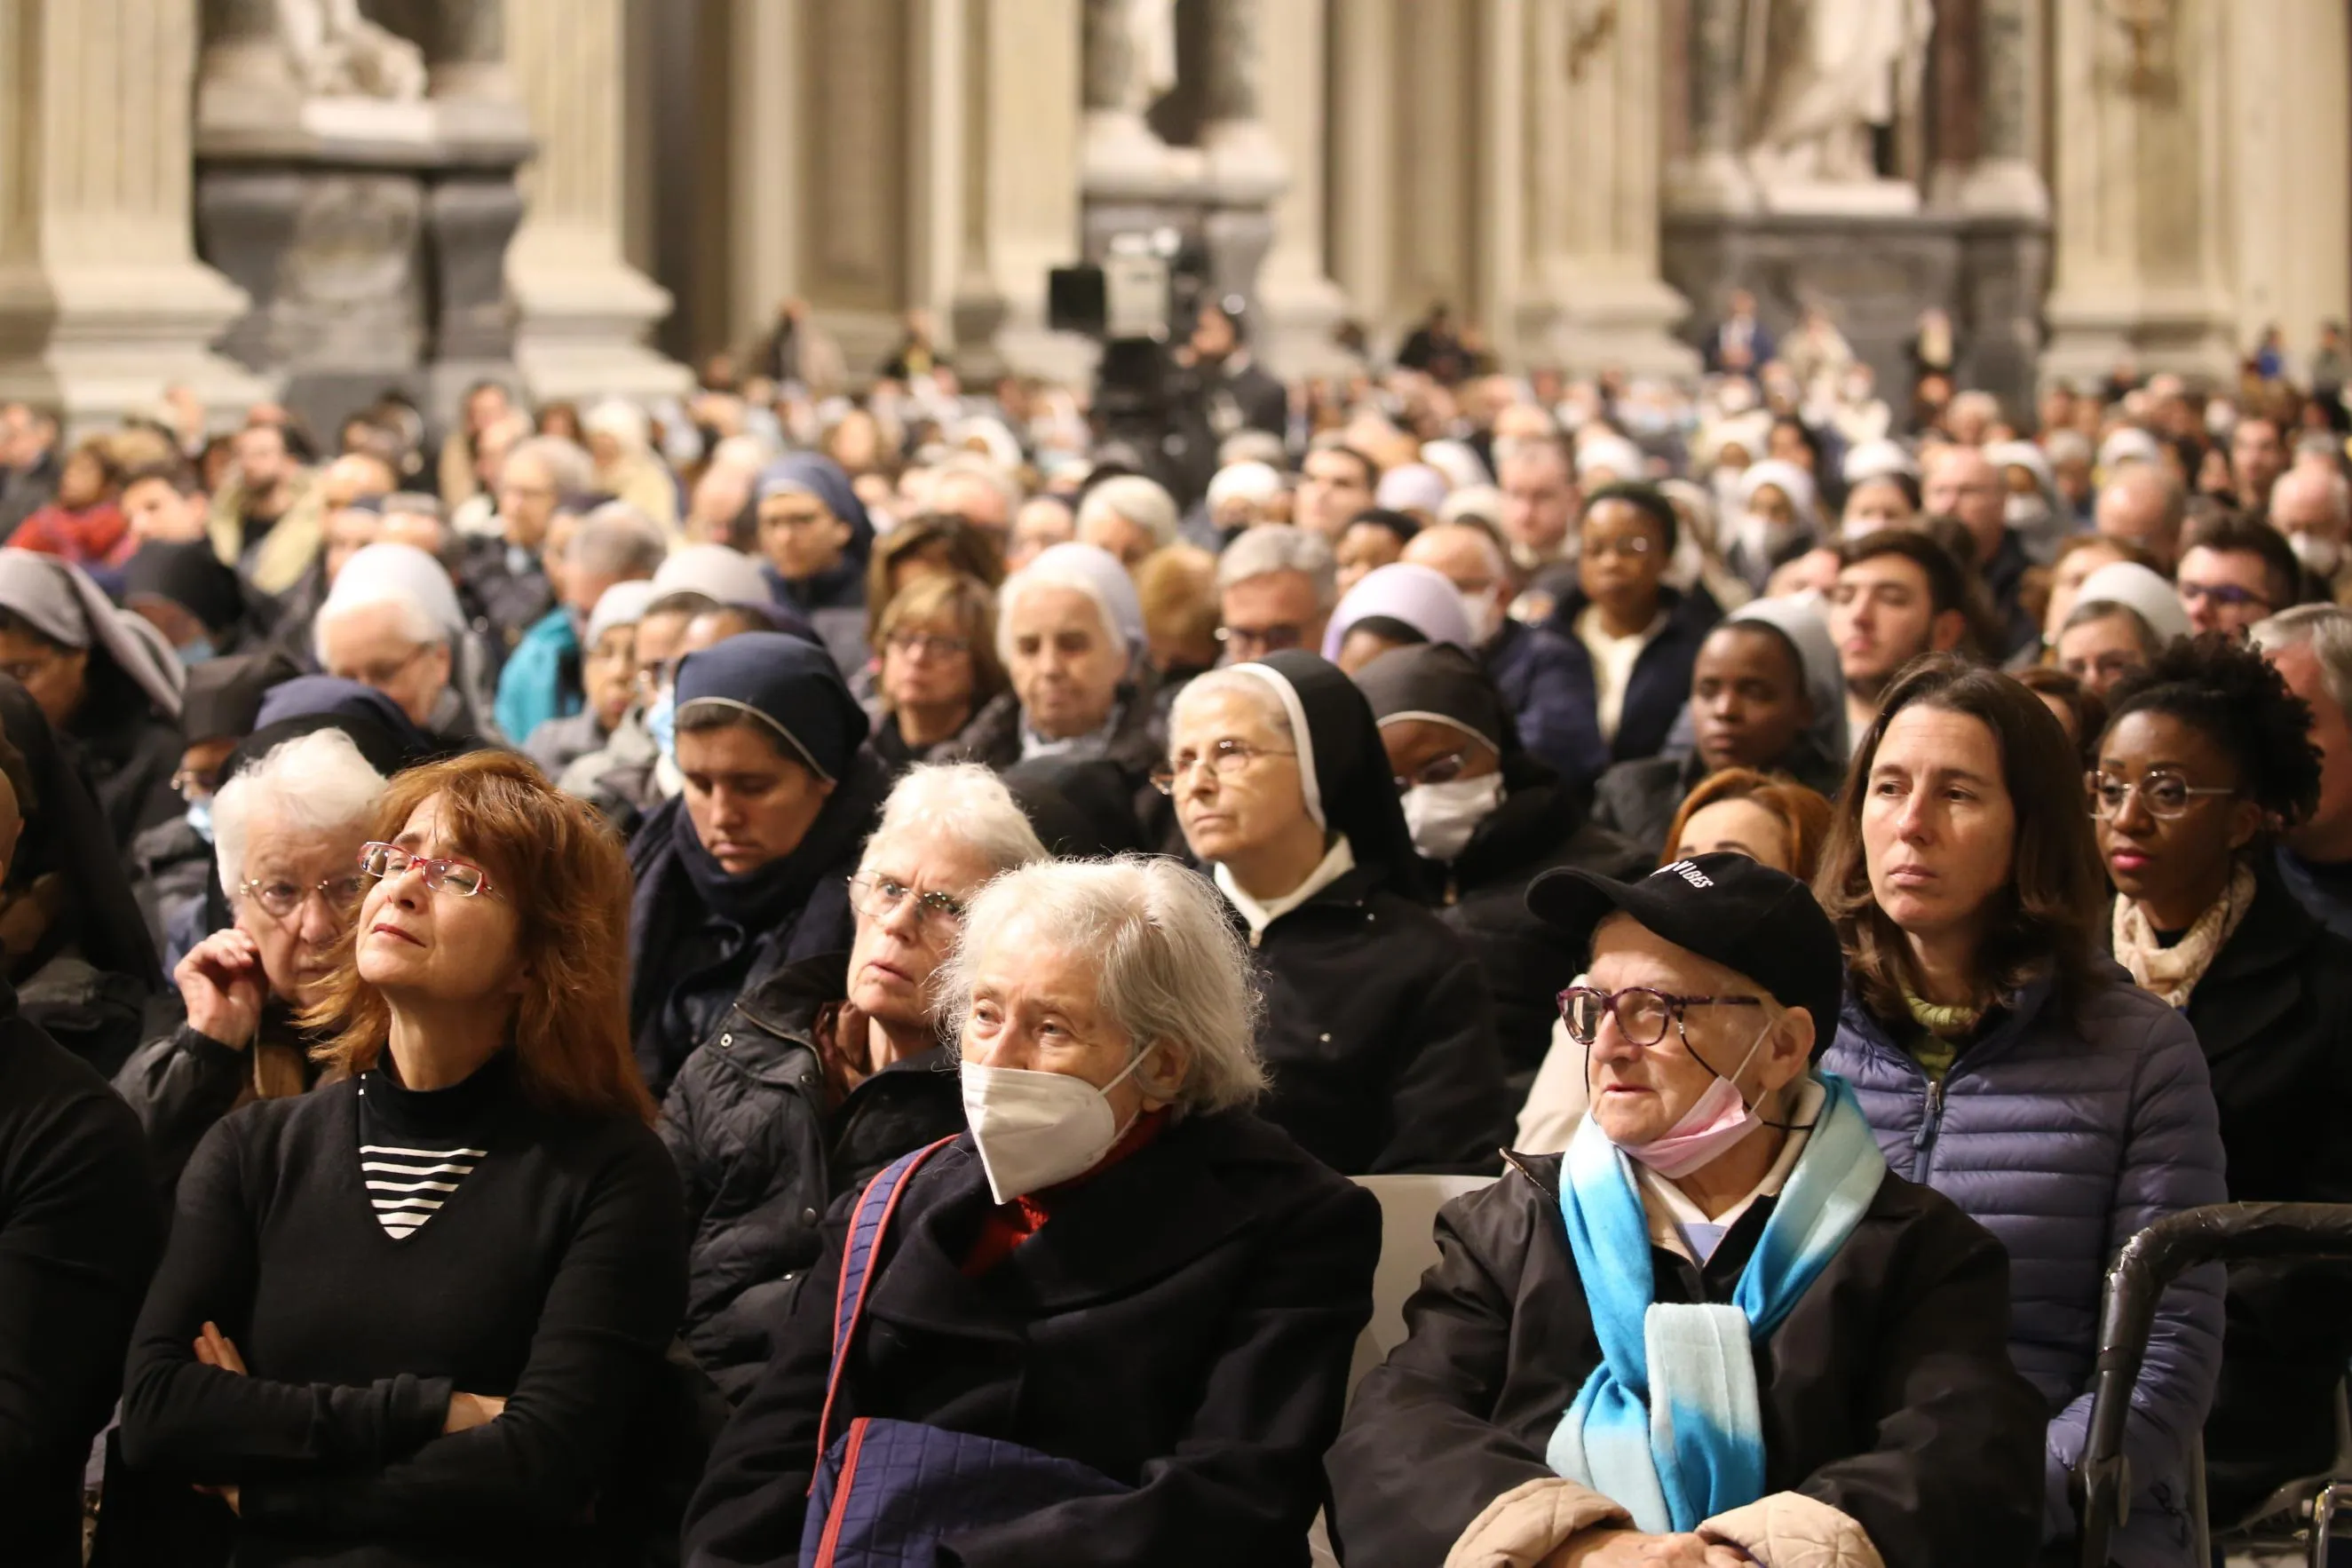 Catholics attending a special Mass for Pope Emeritus Benedict XVI at the Lateran Basilica in Rome, Dec. 30, 2022.?w=200&h=150